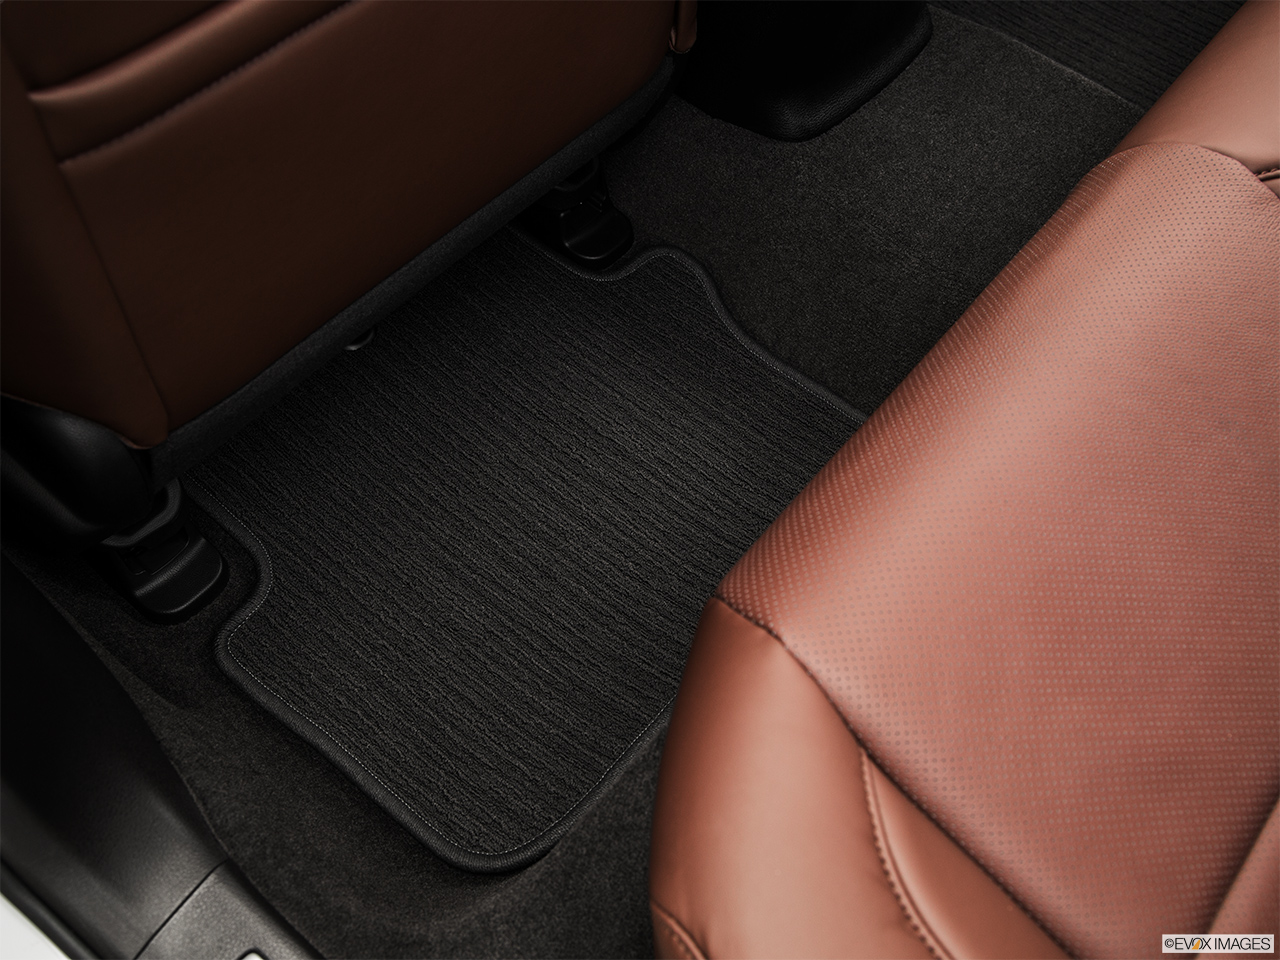 2015 Acura TLX 3.5 V-6 9-AT SH-AWD Rear driver's side floor mat. Mid-seat level from outside looking in. 